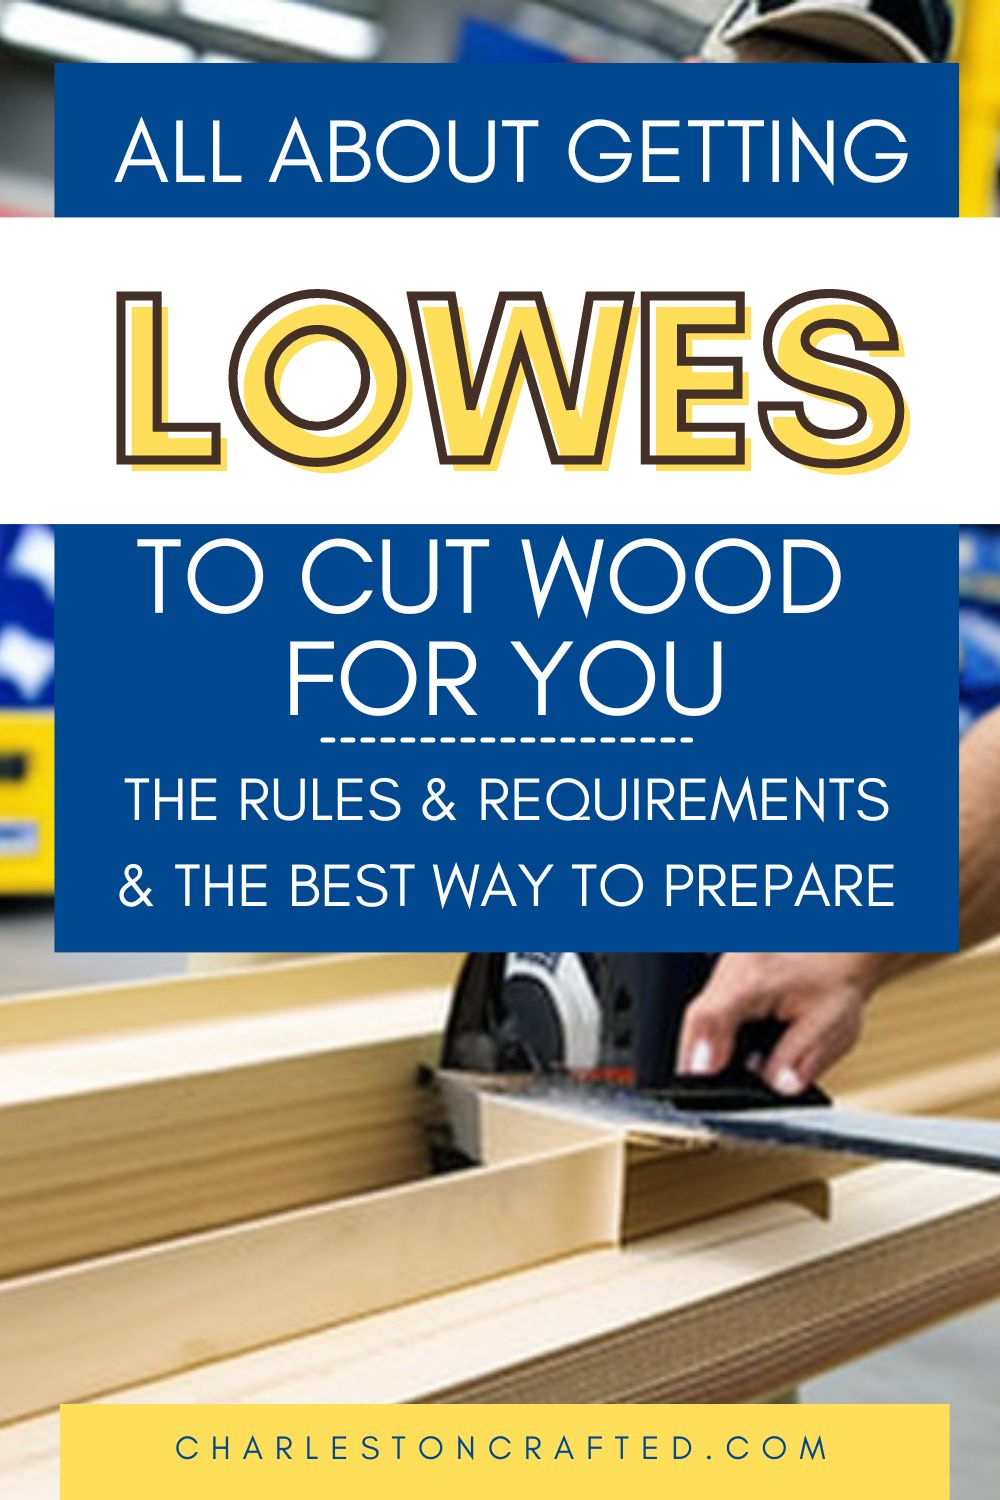 Places That Will Cut Wood For You: Top Local Picks!